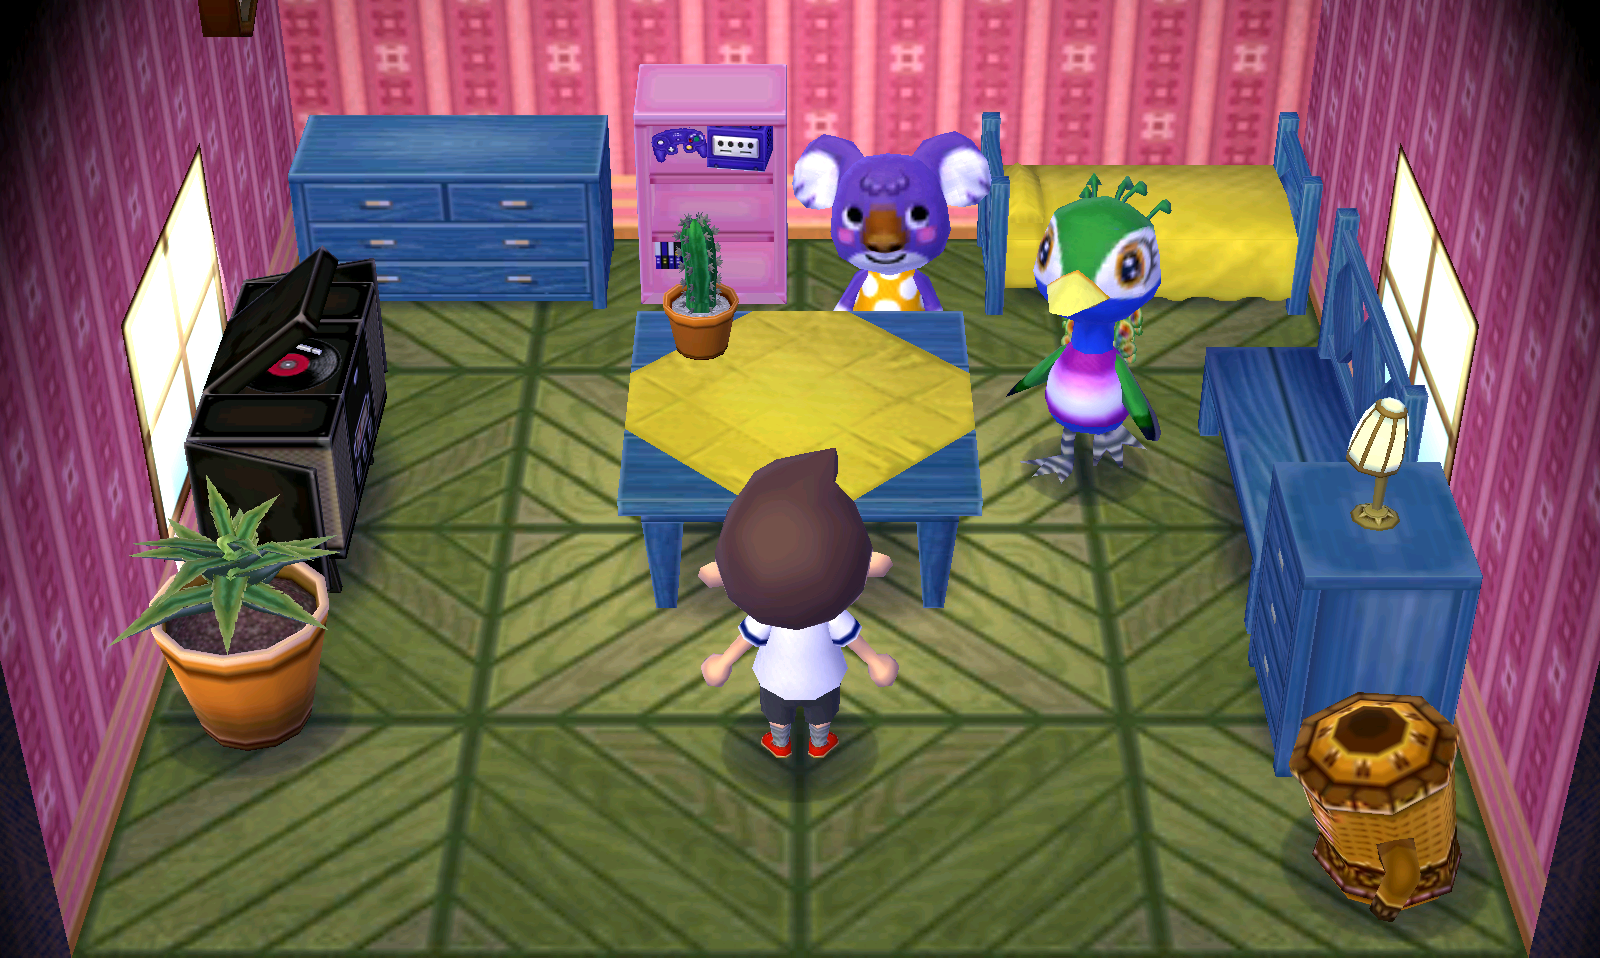 Interior of Sydney's house in Animal Crossing: New Leaf